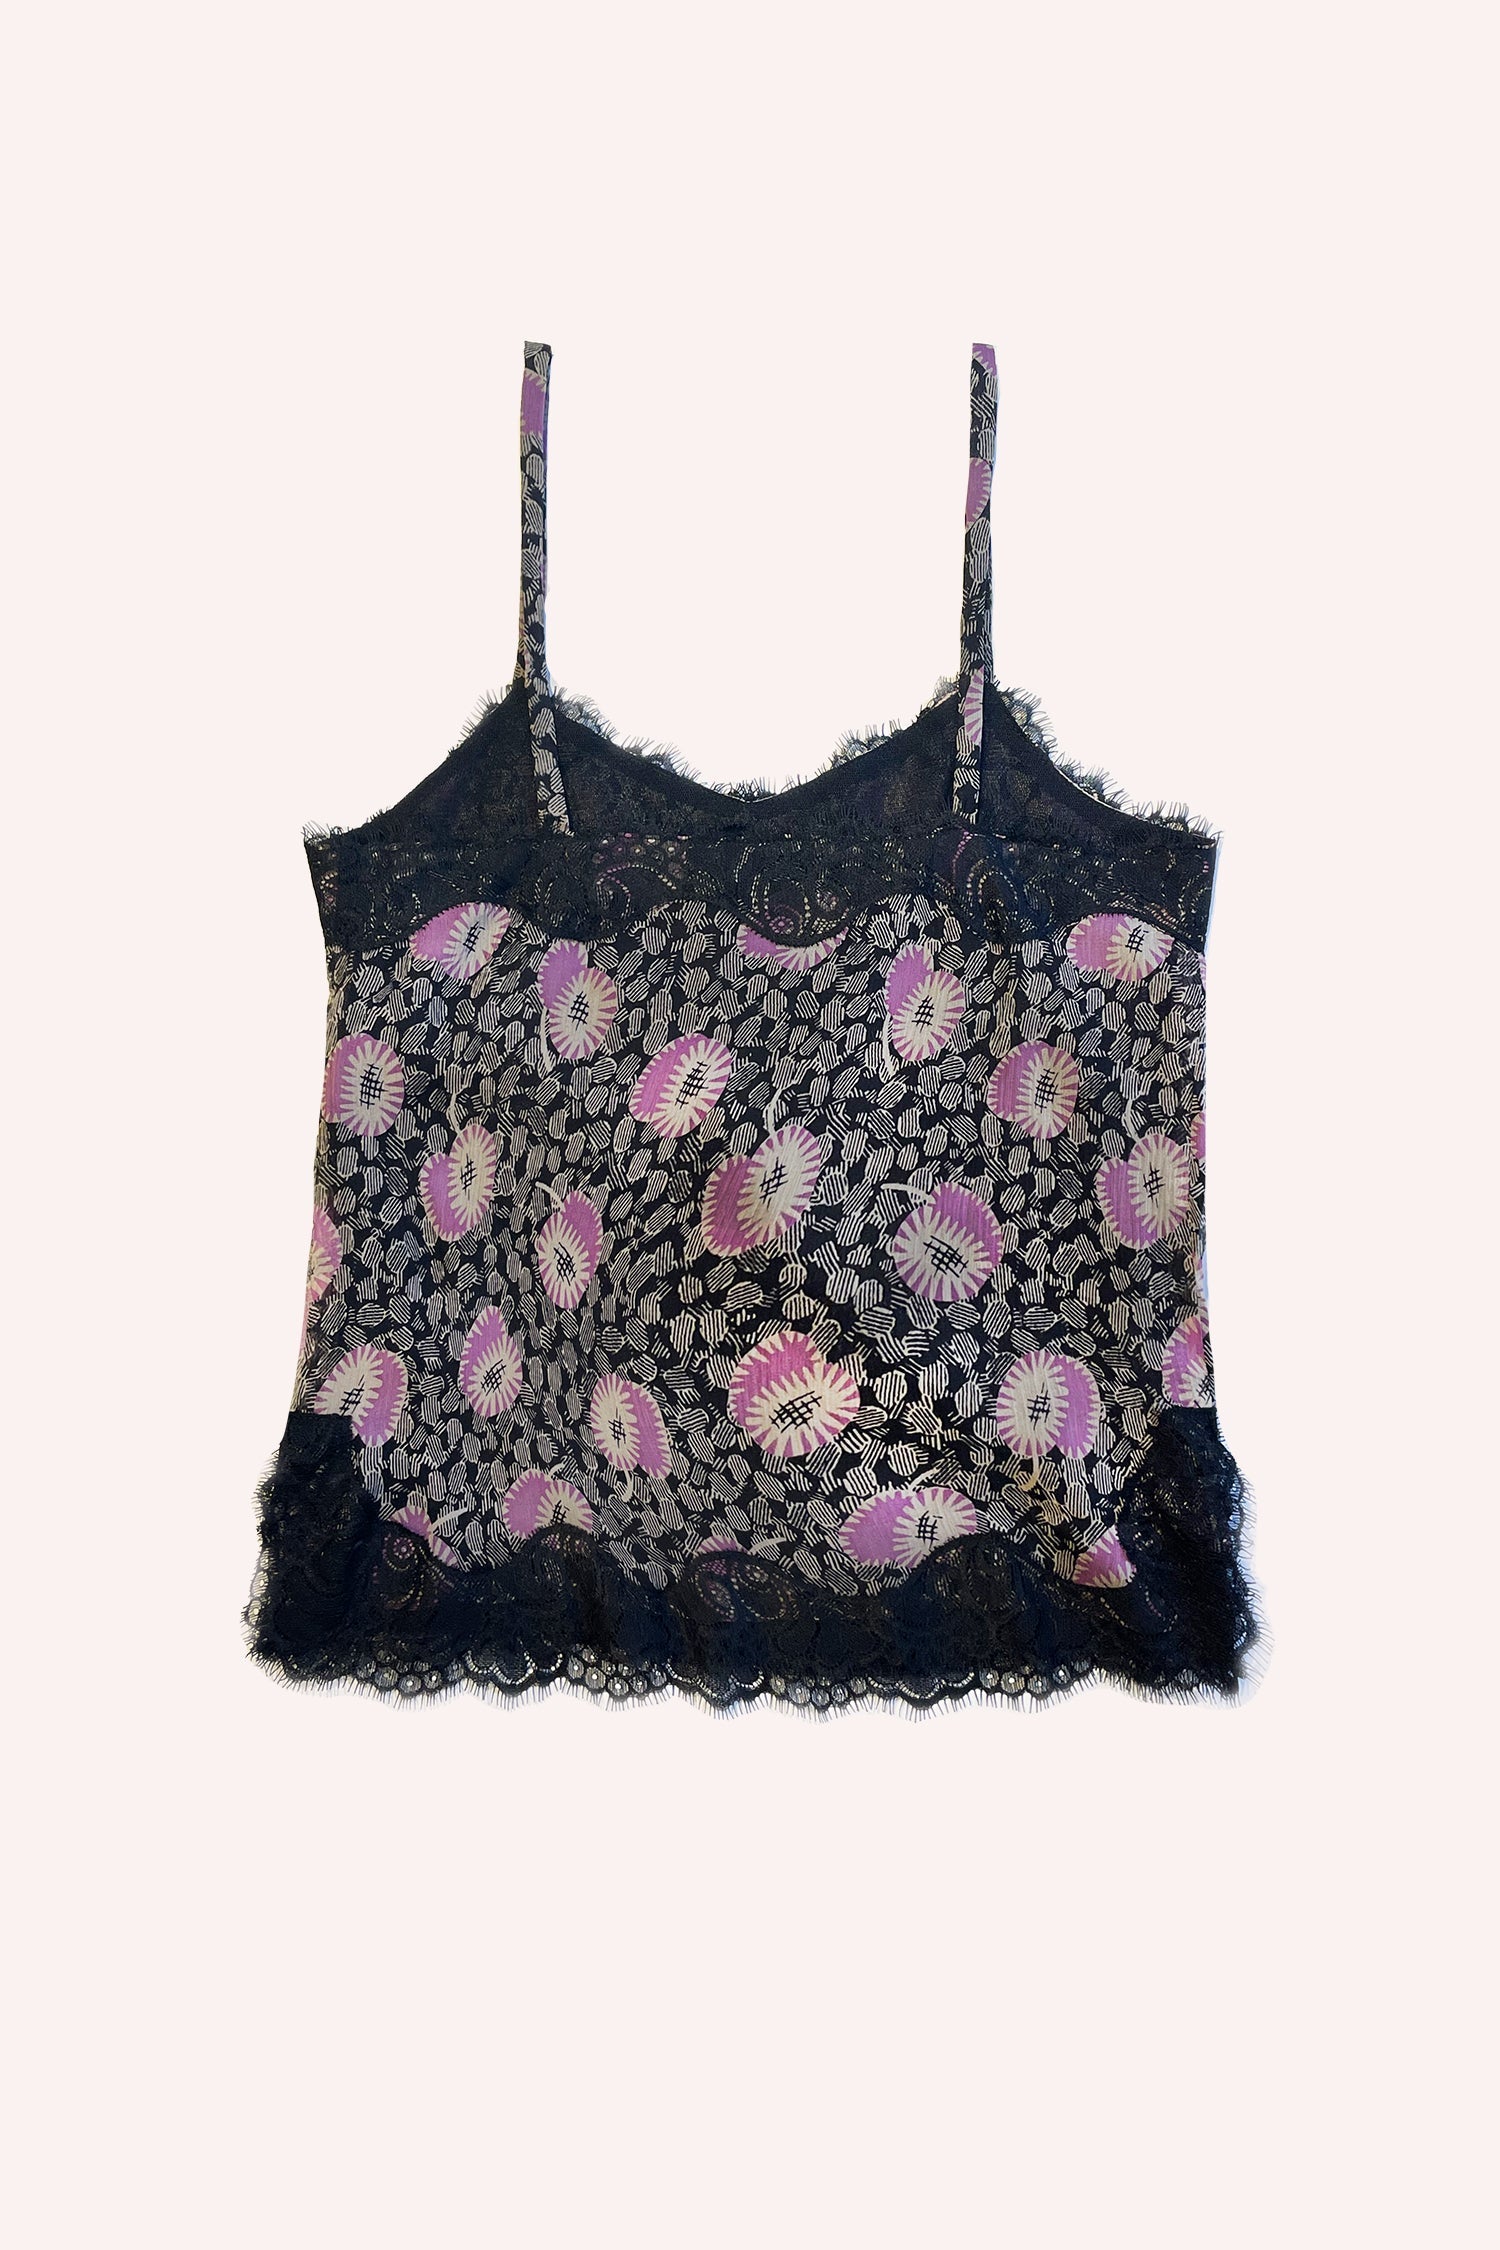 On a black background, white and pink flowers rest on grayish leaves, with black lace stitching accentuating the design